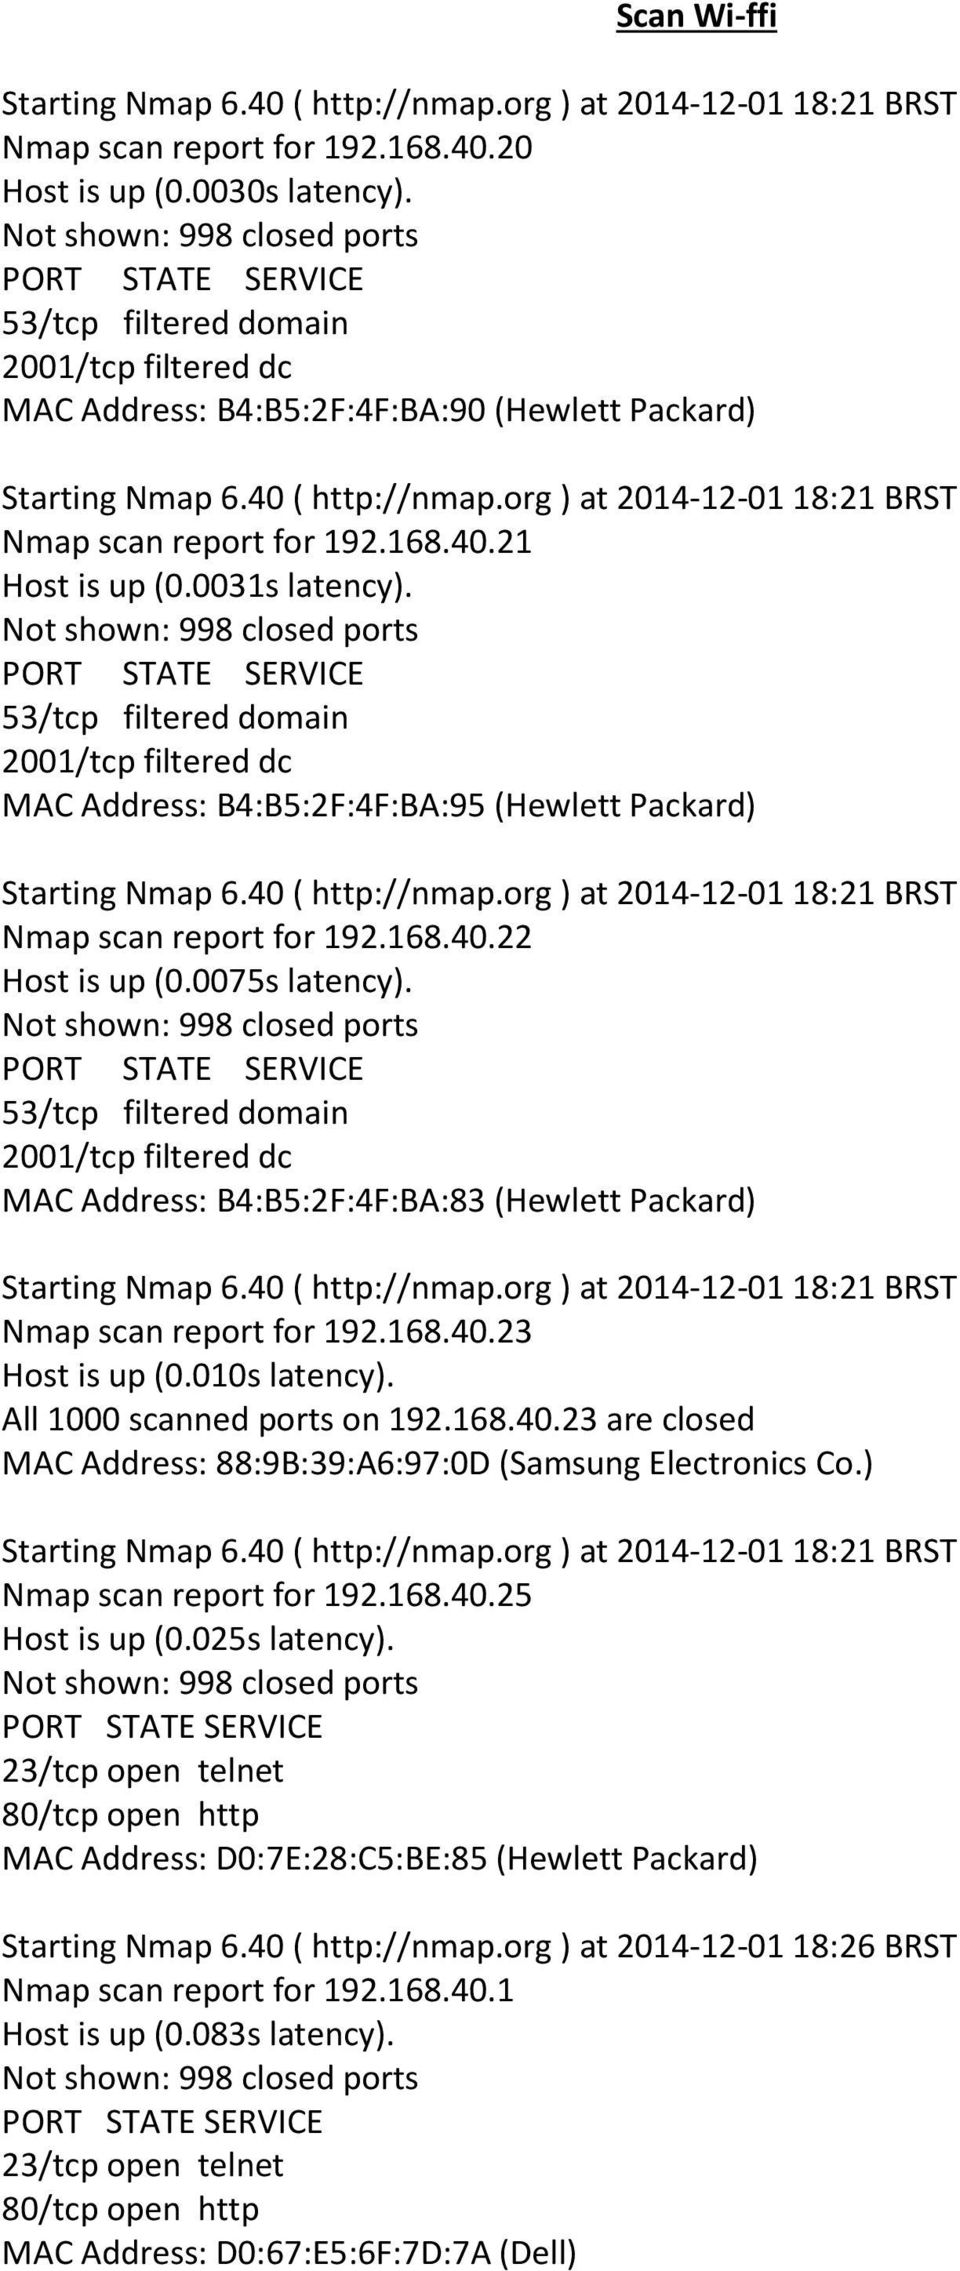 MAC Address: B4:B5:2F:4F:BA:95 (Hewlett Packard) Starting Nmap 6.40 ( http://nmap.org ) at 2014-12-01 18:21 BRST Nmap scan report for 192.168.40.22 Host is up (0.0075s latency).